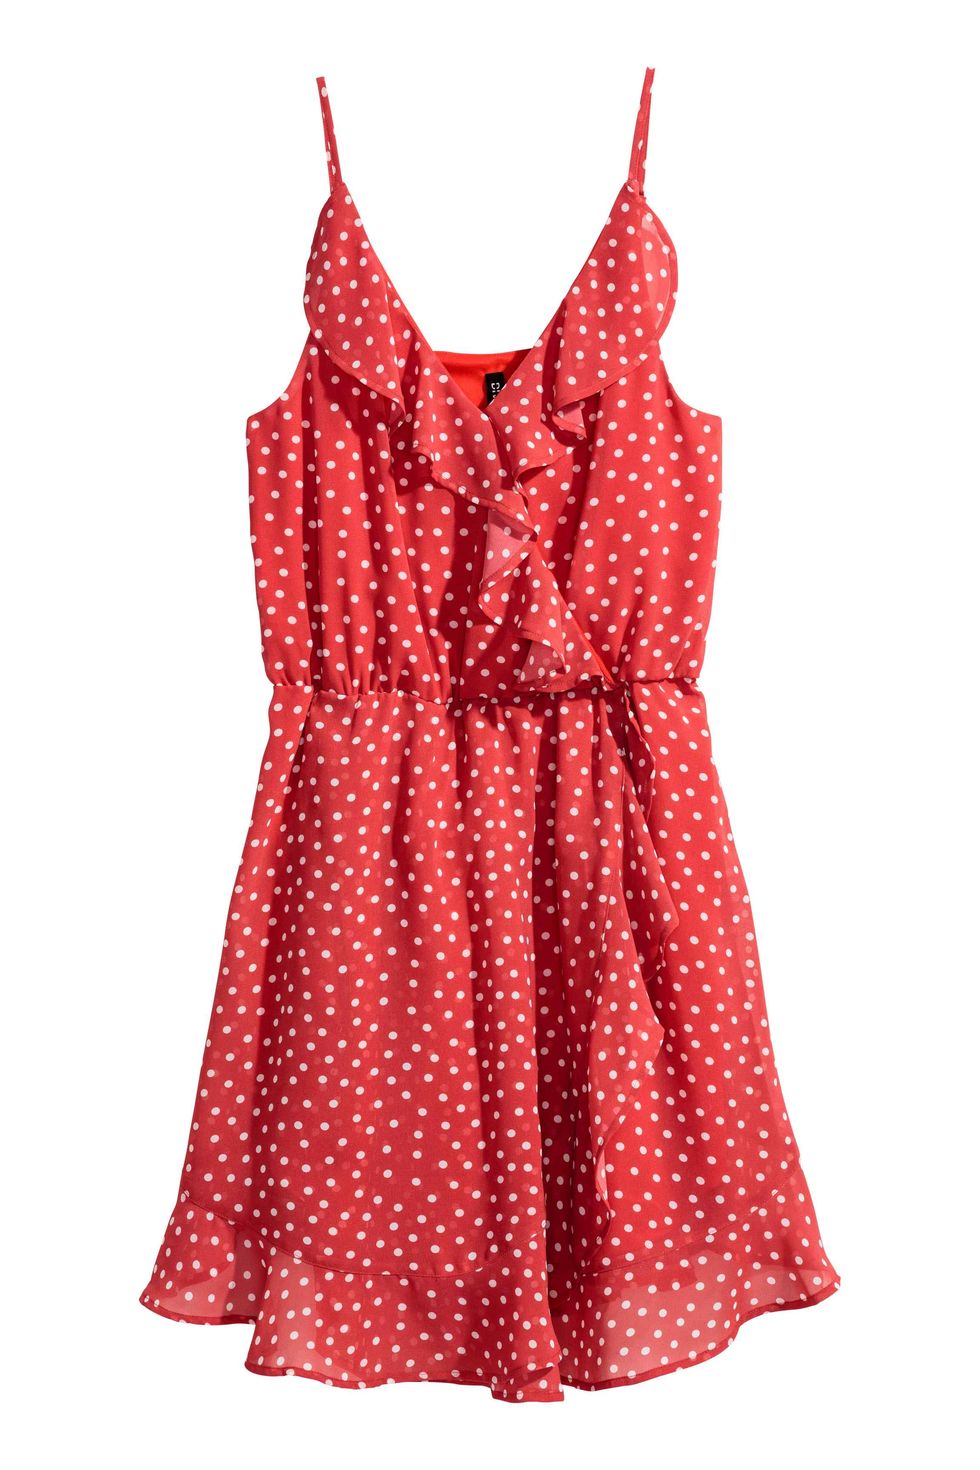 Clothing, Product, Sleeve, Collar, Textile, Pattern, Red, White, Dress, One-piece garment, 